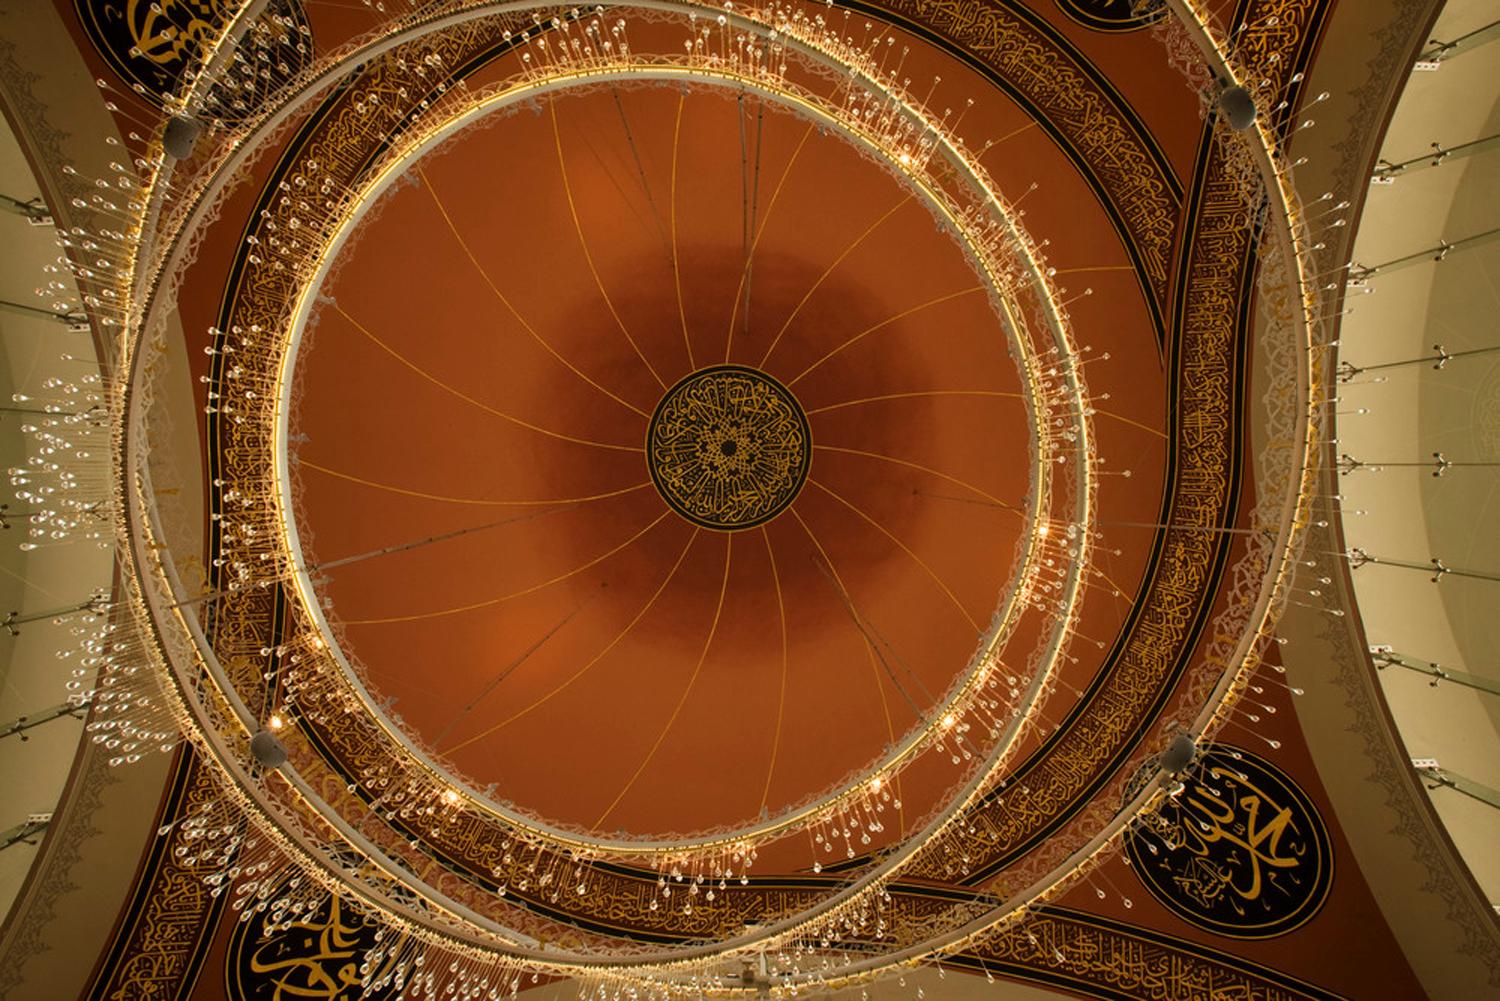 Dome, dome belt and chandelier